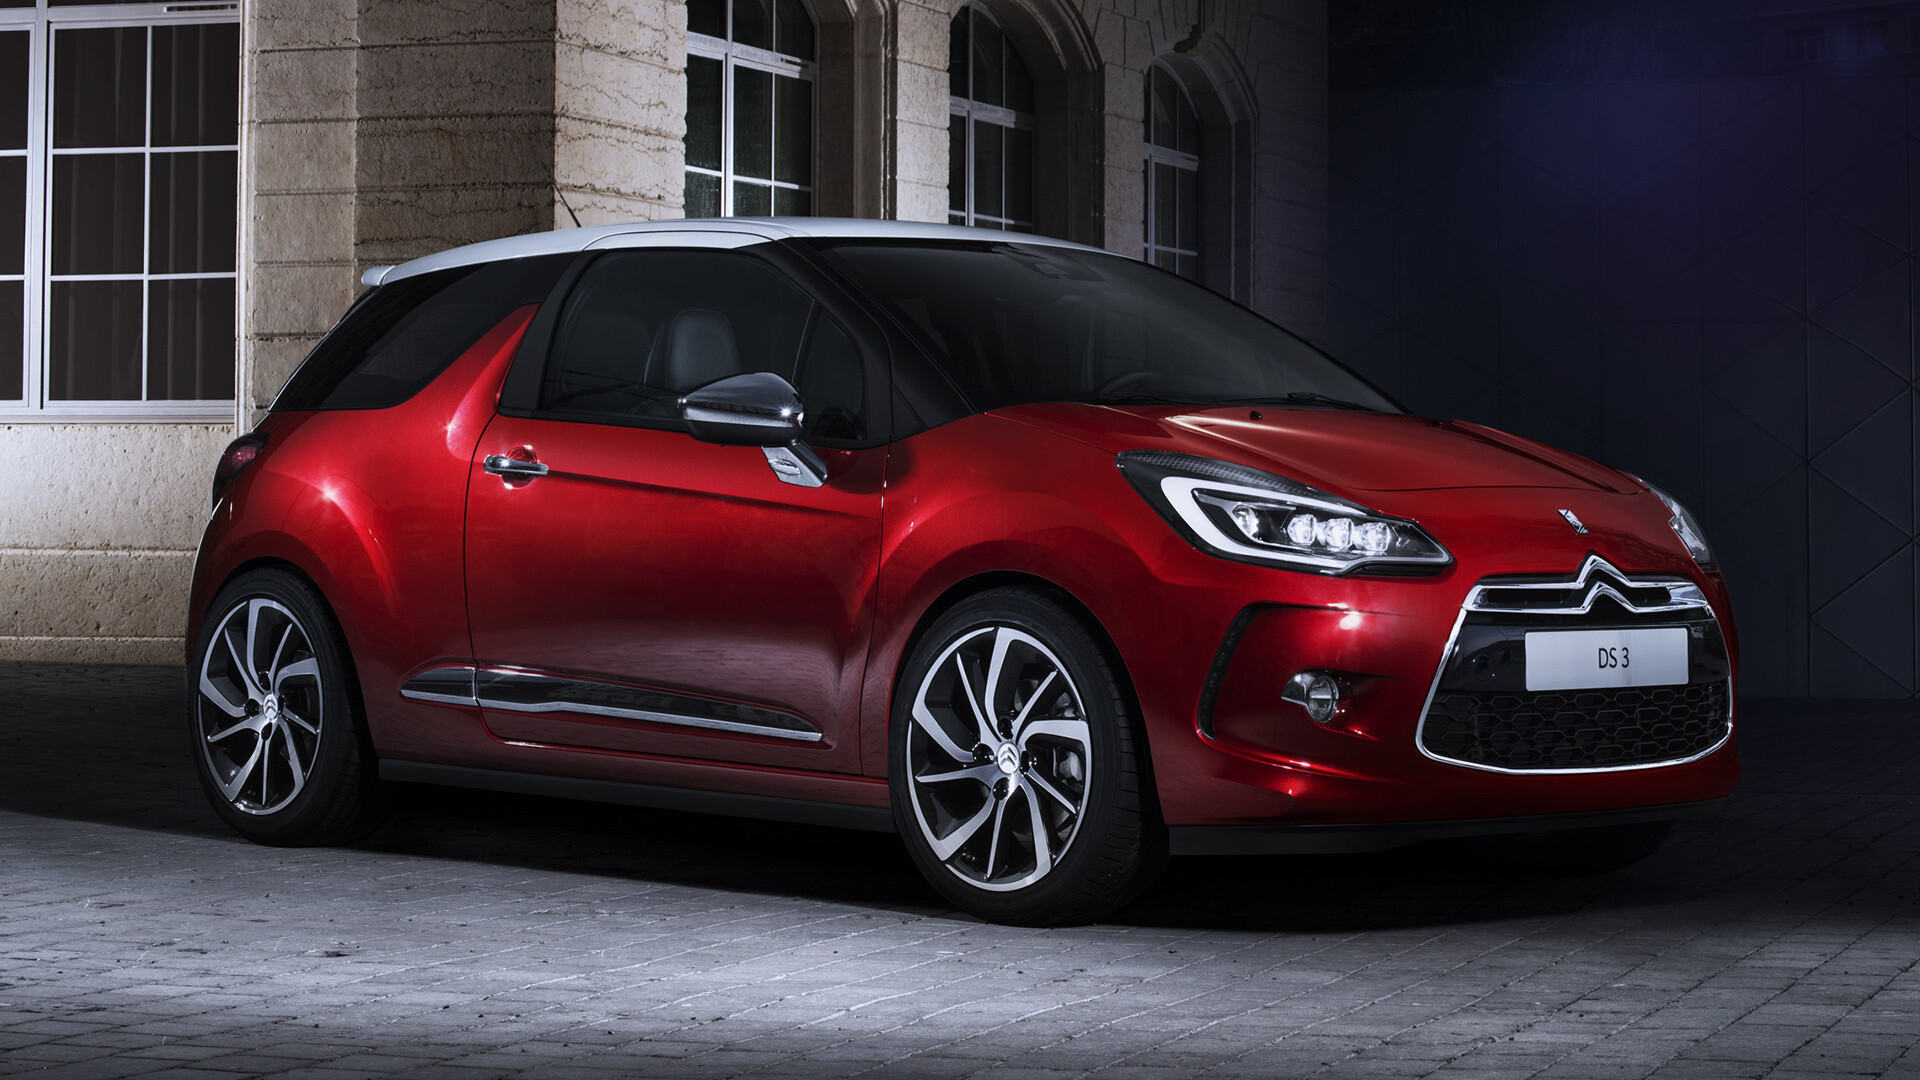 Citroen: 2014 model DS3, French car manufacturer, owned by Stellantis since 2021. 1920x1080 Full HD Wallpaper.